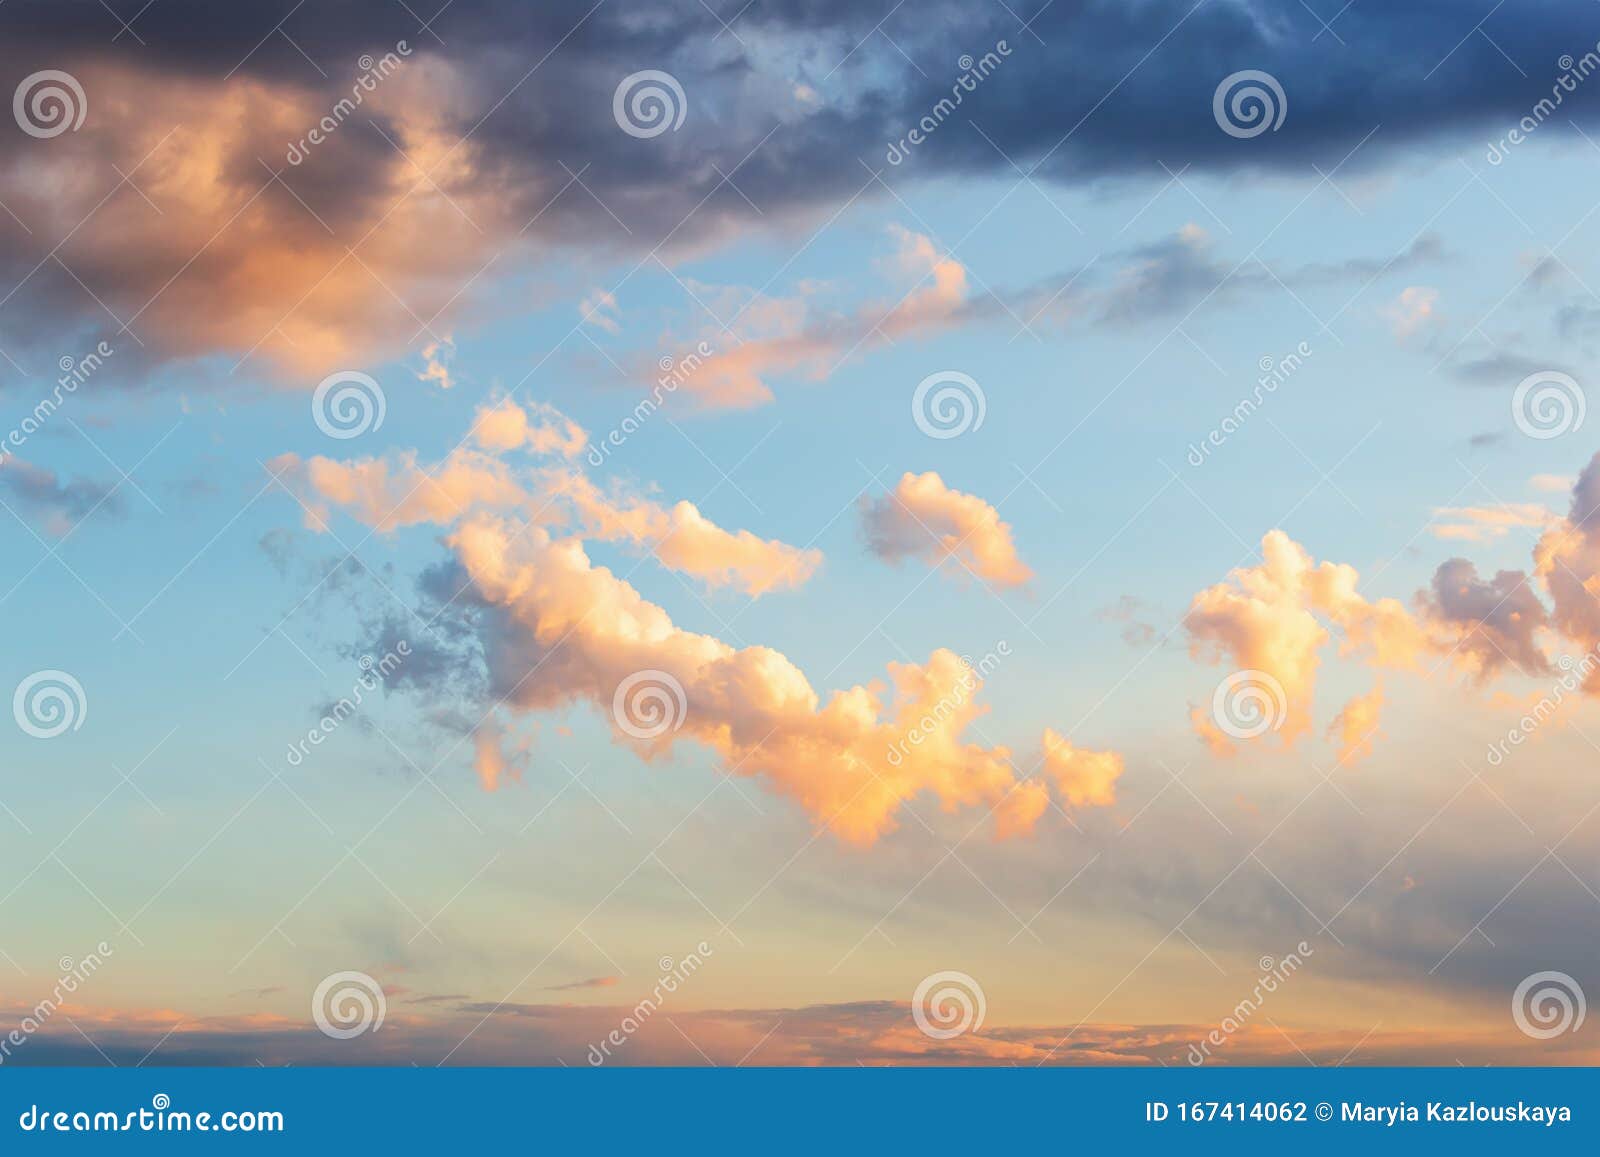 Beautiful Golden Cloud In A Blue Sky Just Before Sunset Scenic